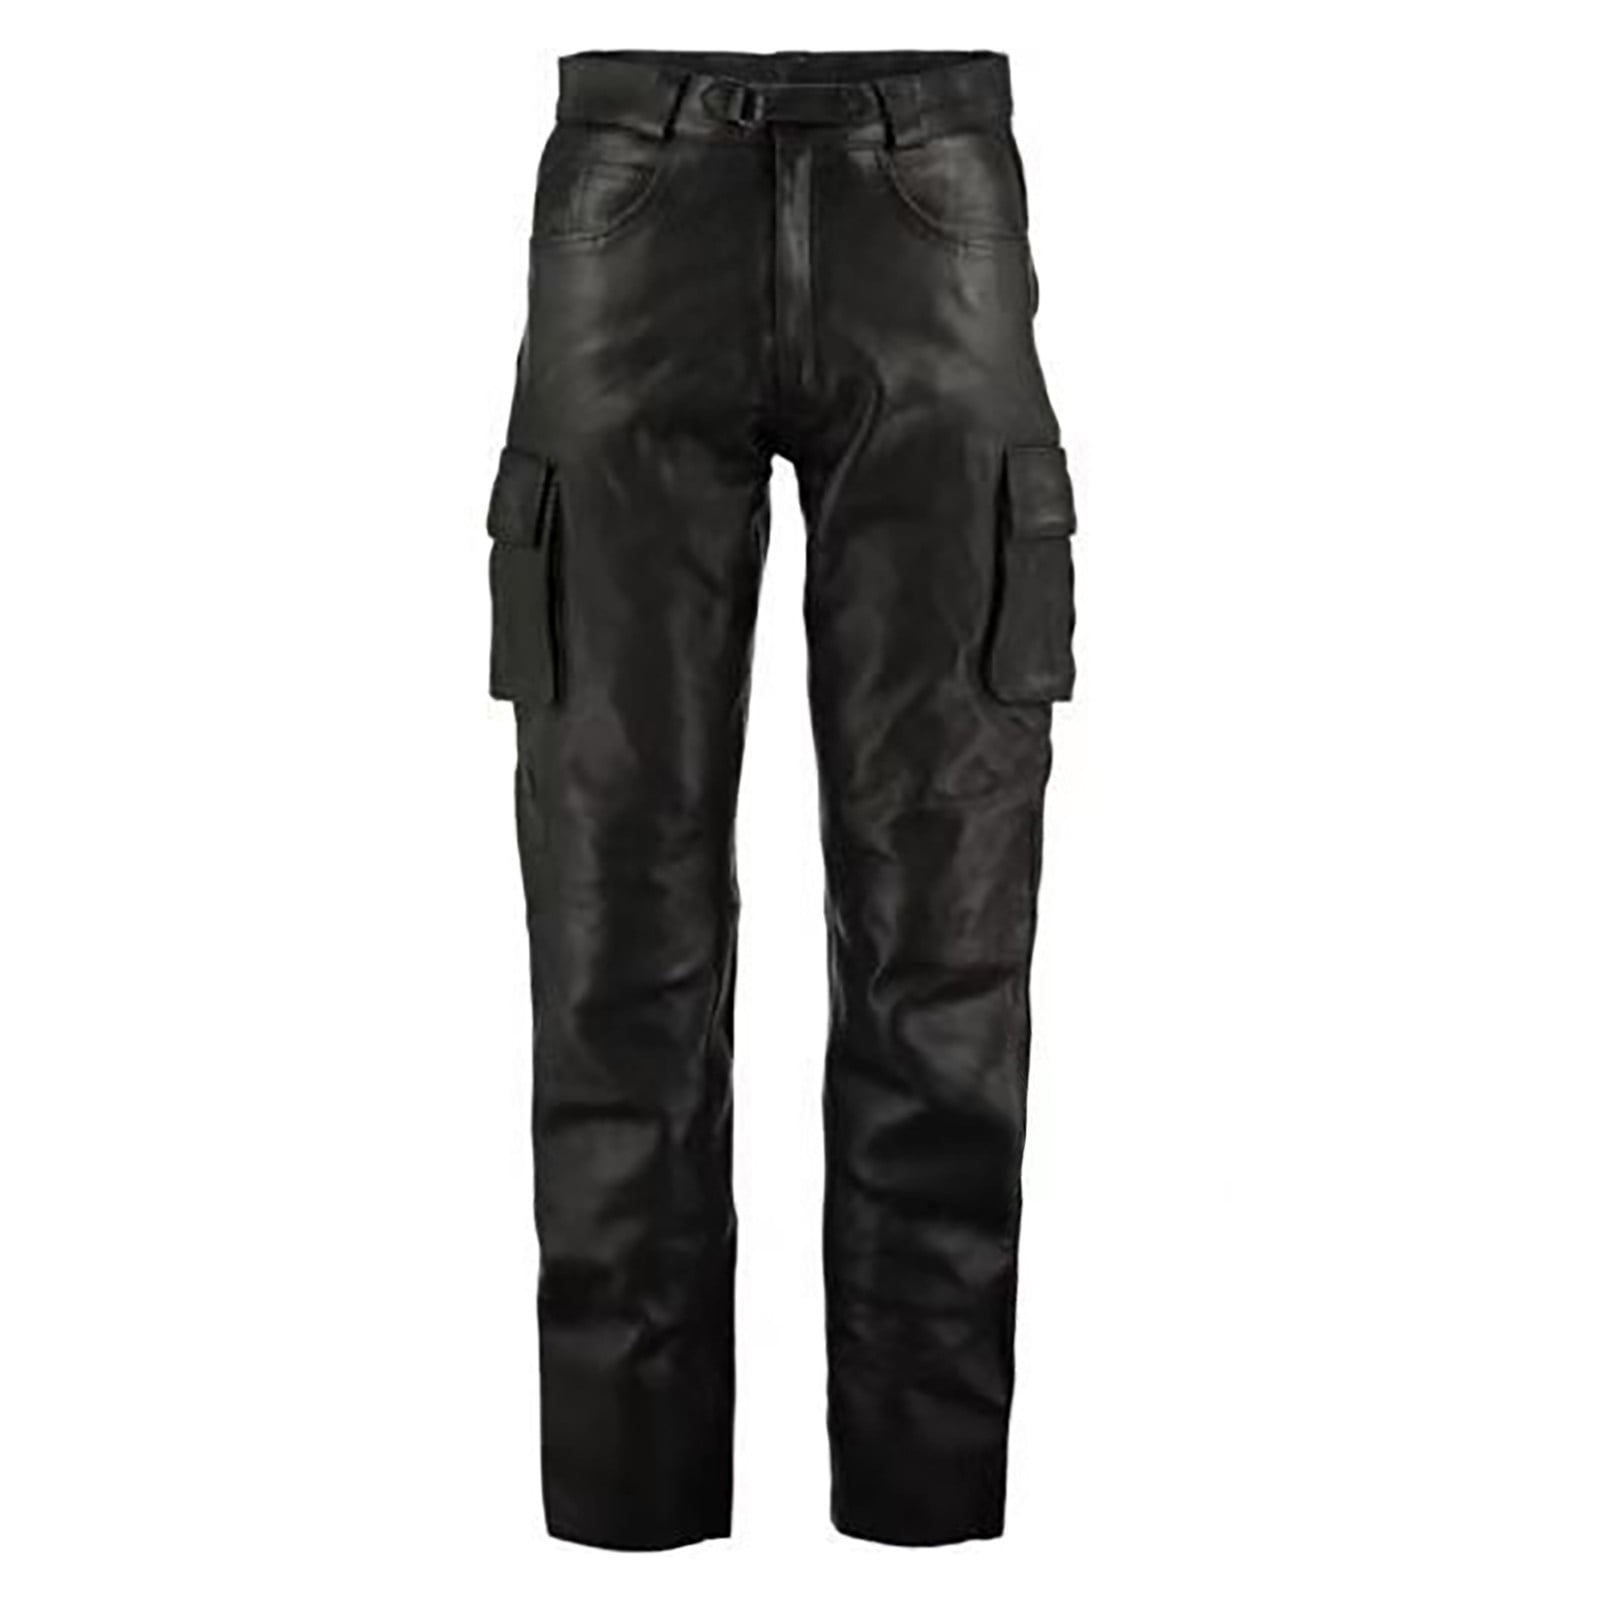 WUWUQF Leather Pants Men's Fashion Leisure Comfortable and Versatile ...